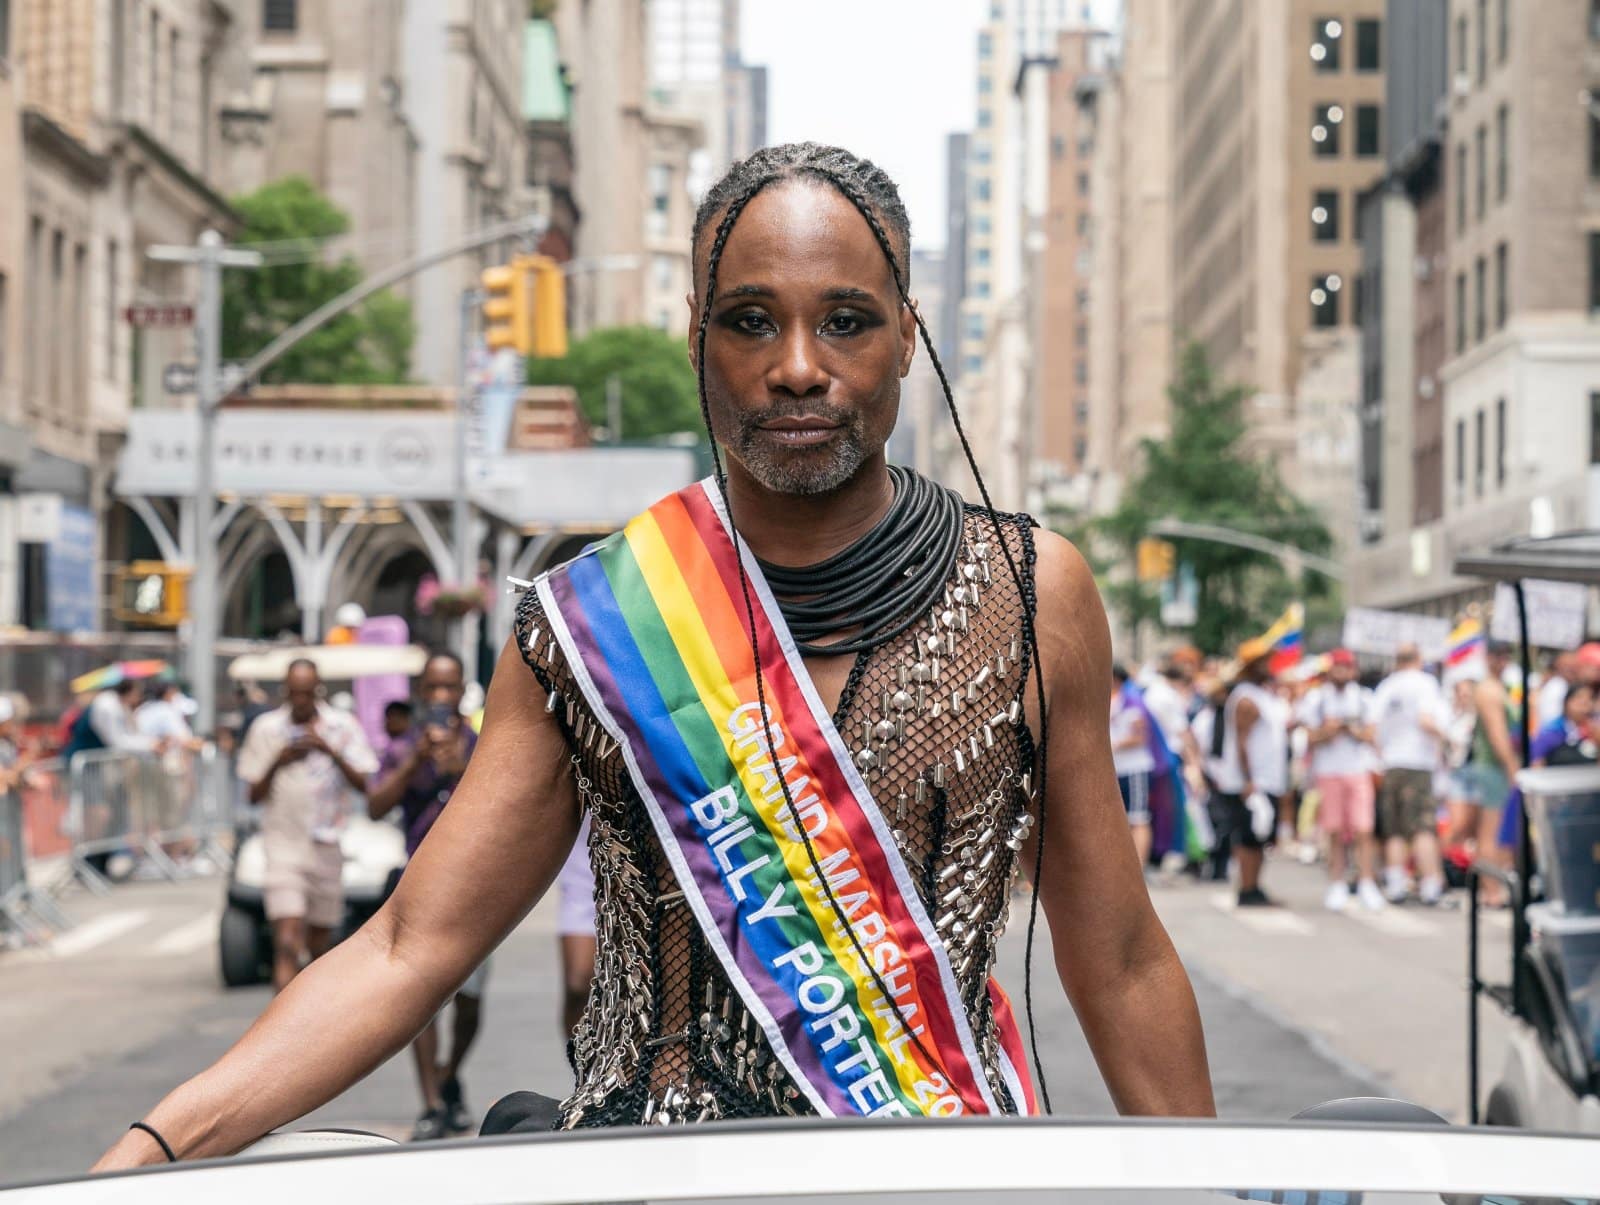 Image Credit: Shutterstock / lev radin <p><span>An openly gay Black man, Porter uses his visibility to challenge gender norms and advocate for the LGBTQ+ community, often speaking on the intersectionality of race, gender, and sexuality.</span></p>